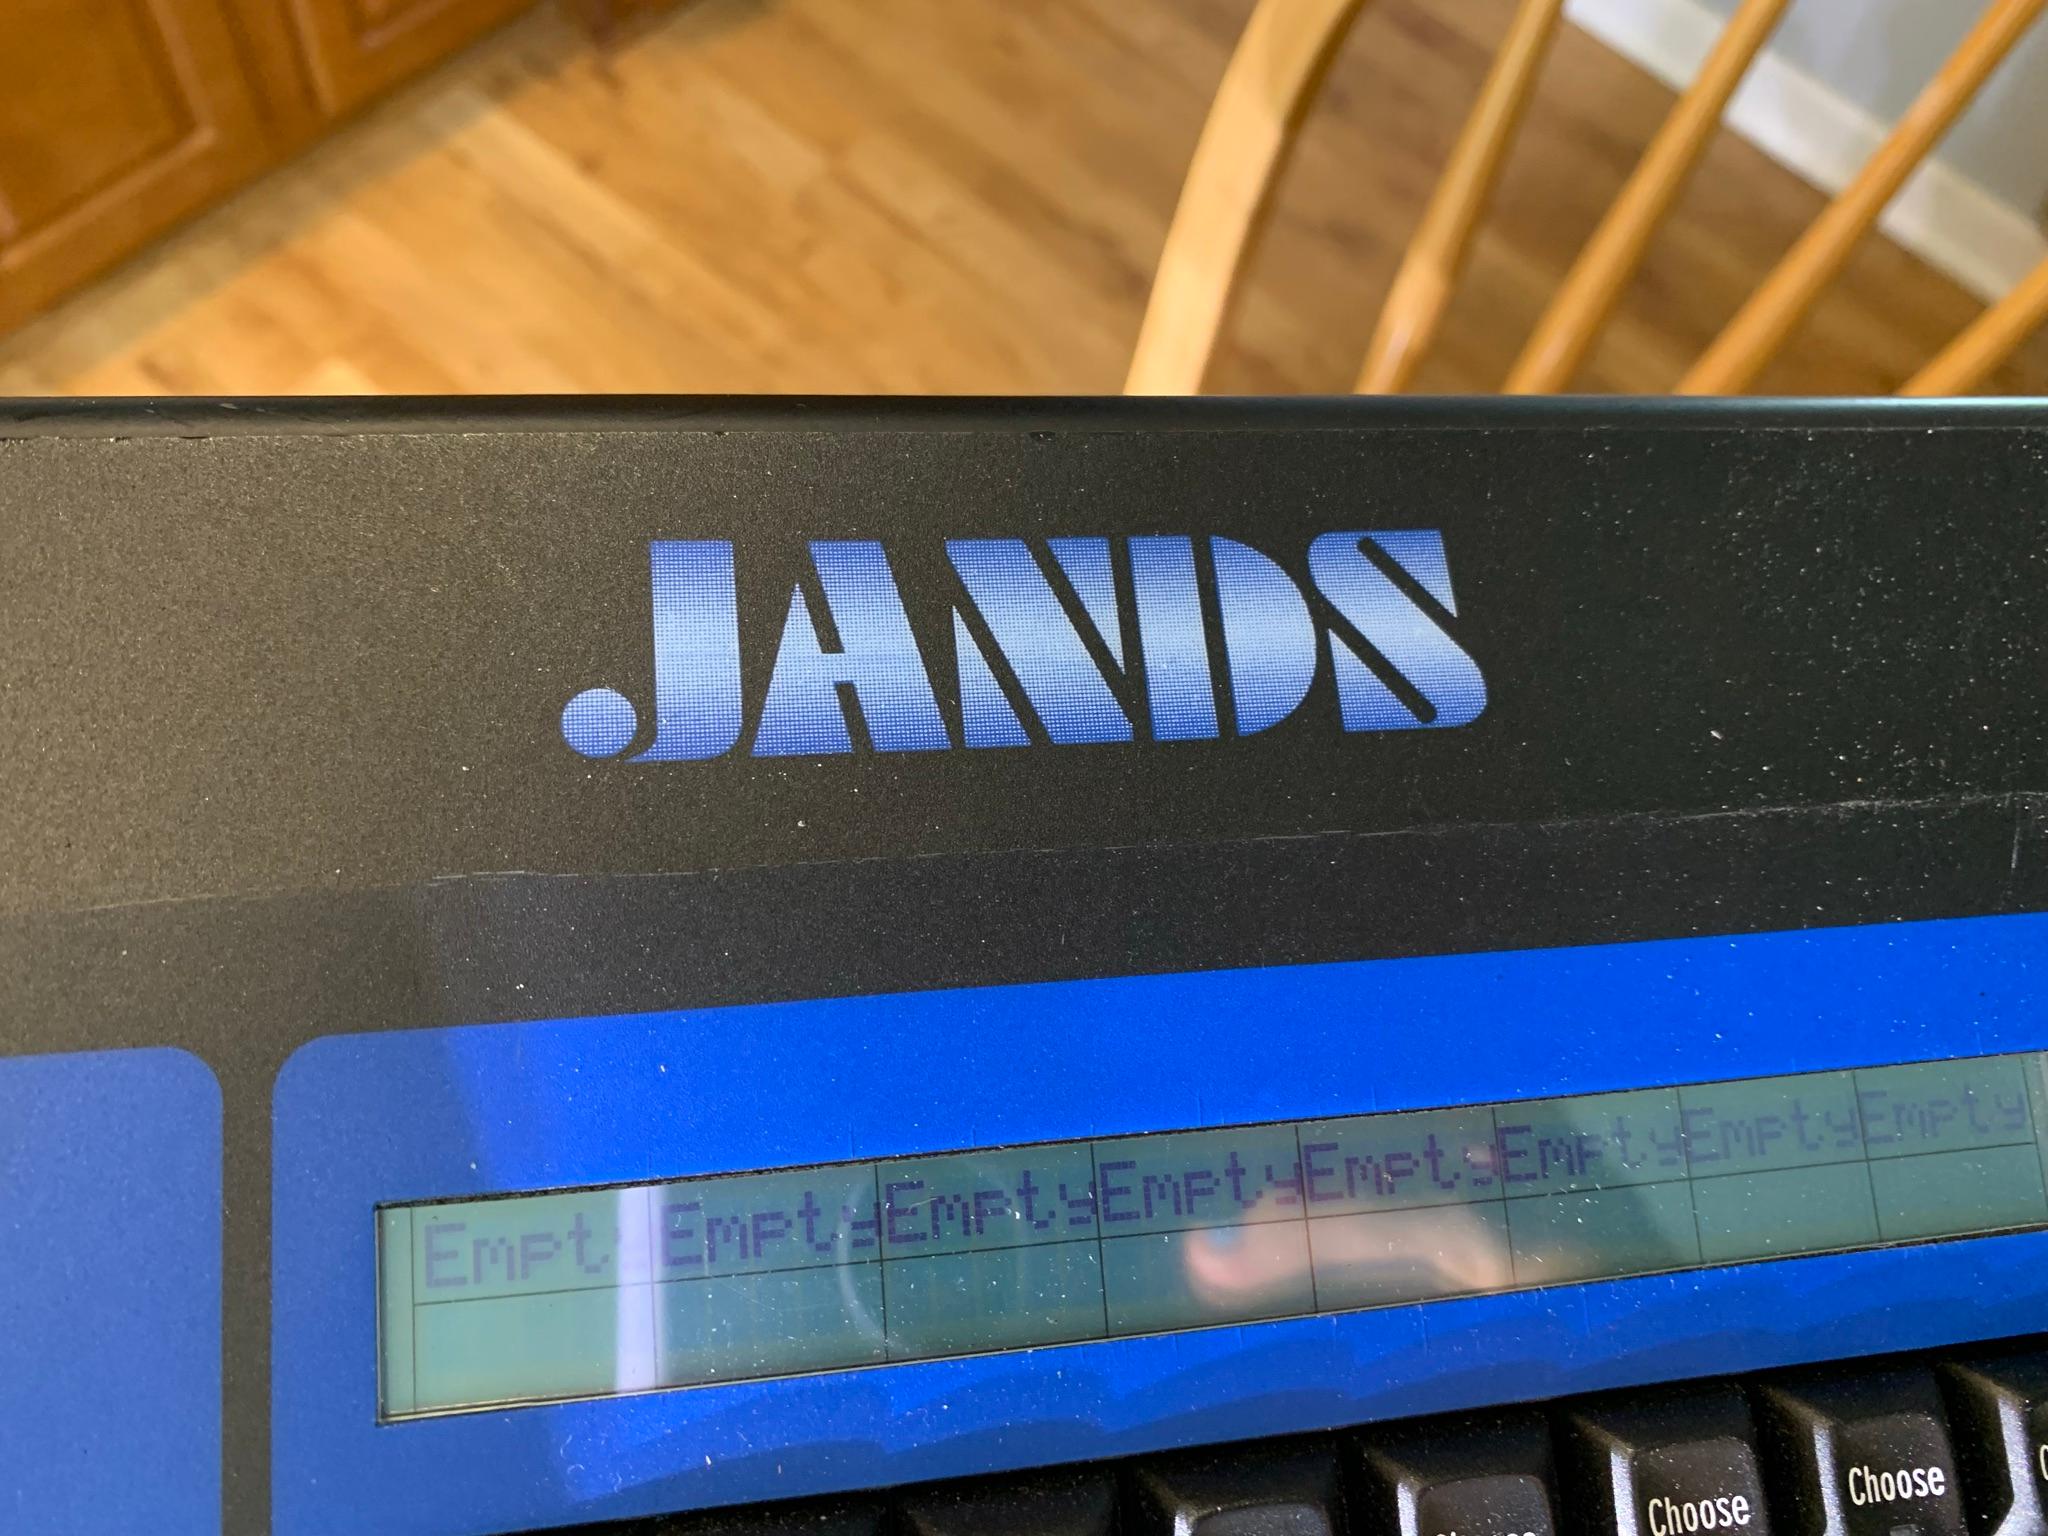 Jands Hog 500 Light Board with Compact Disk